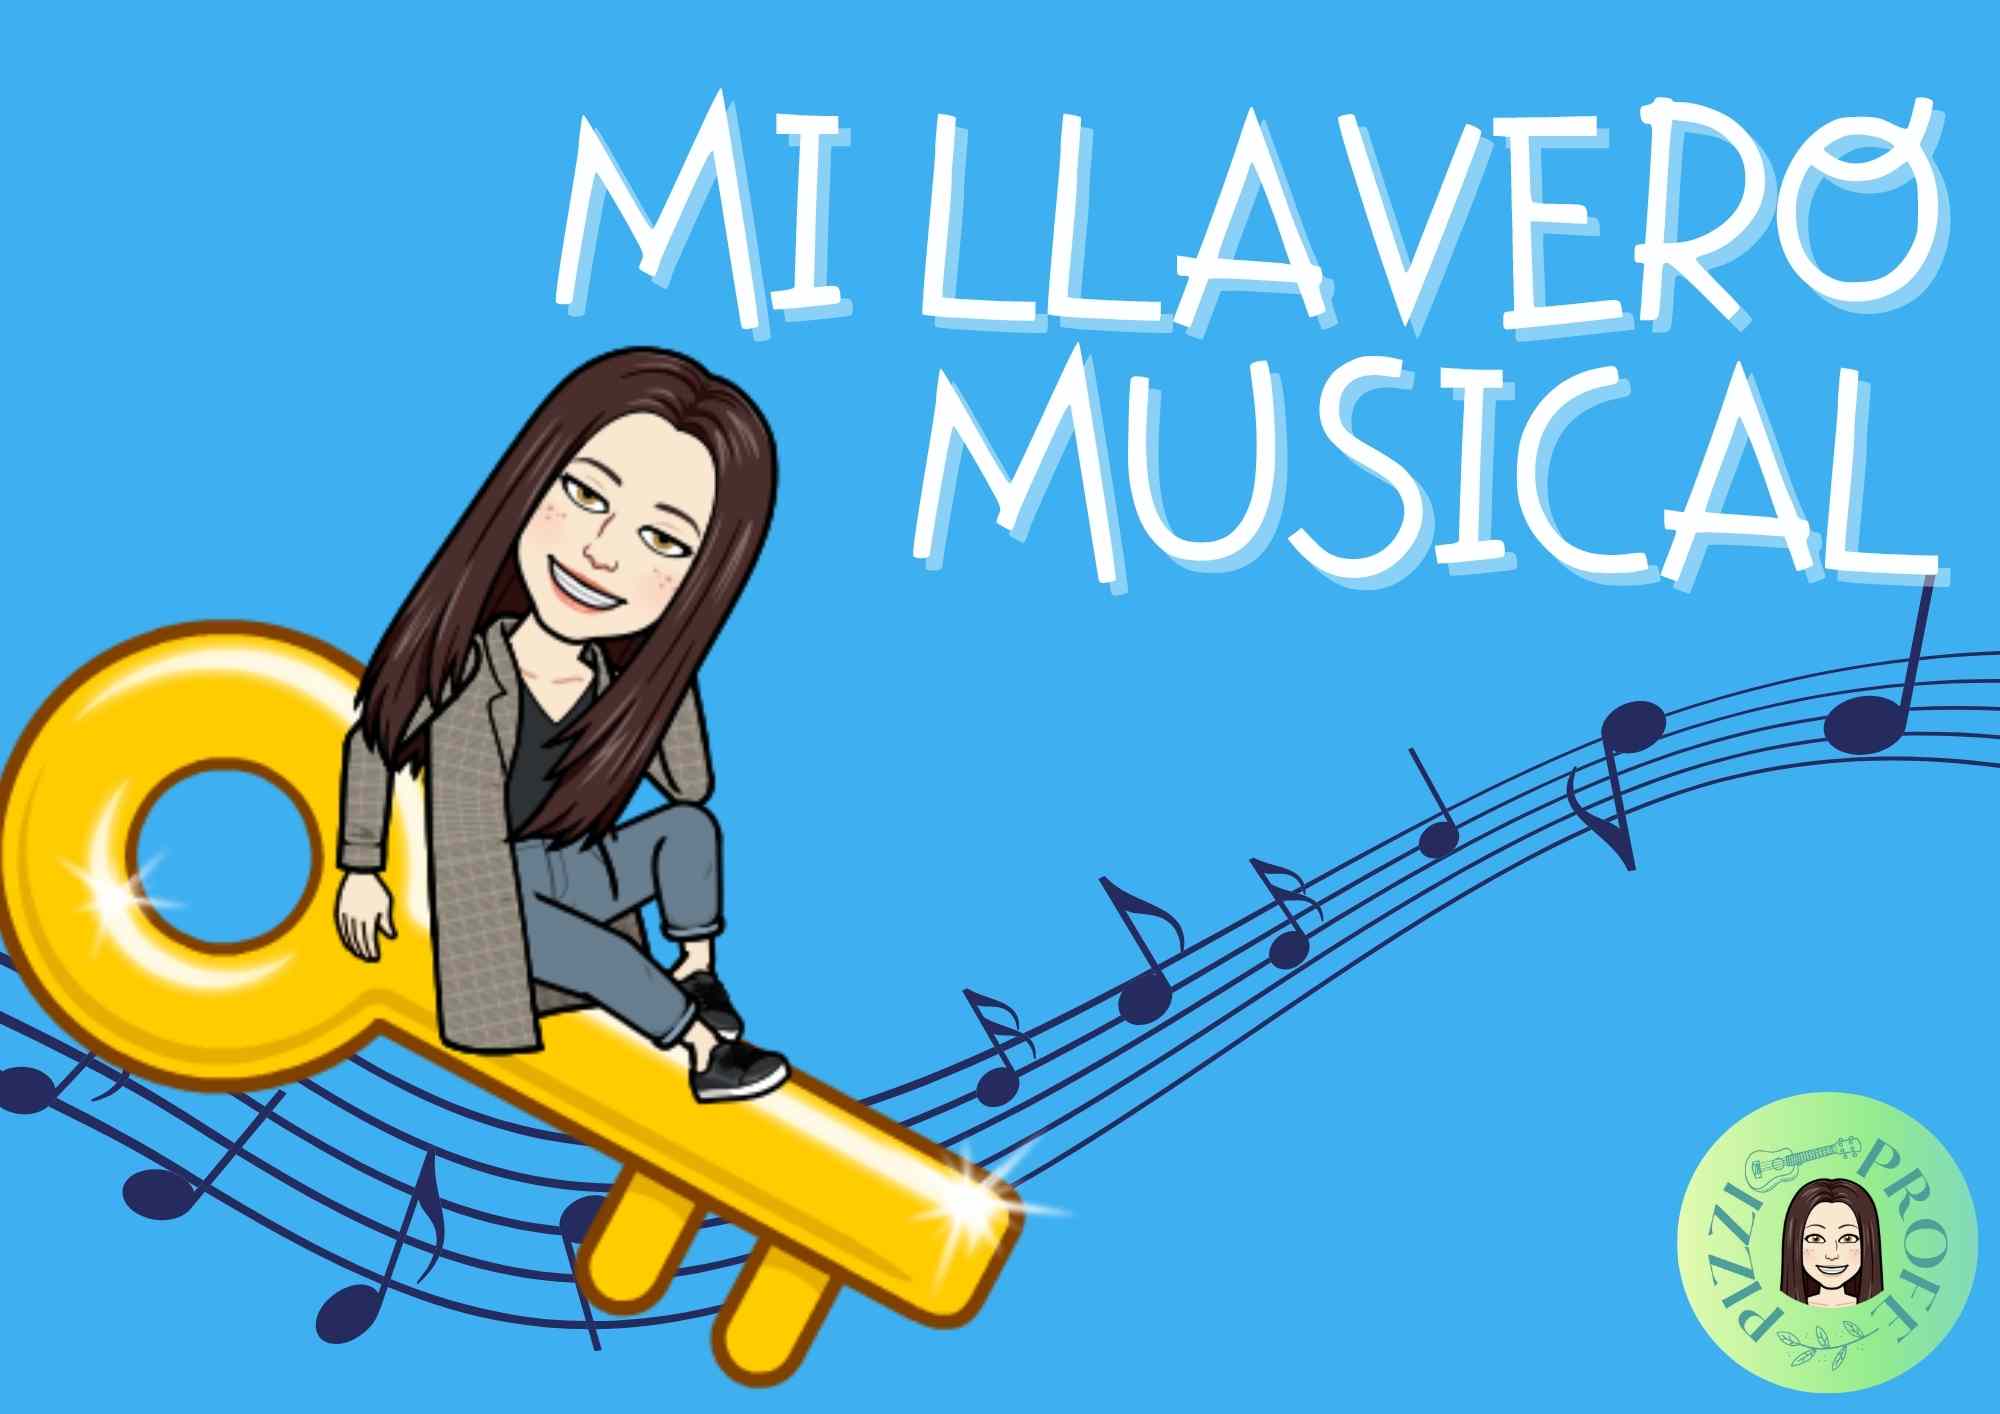 Mi llavero musical by @pizziprofe